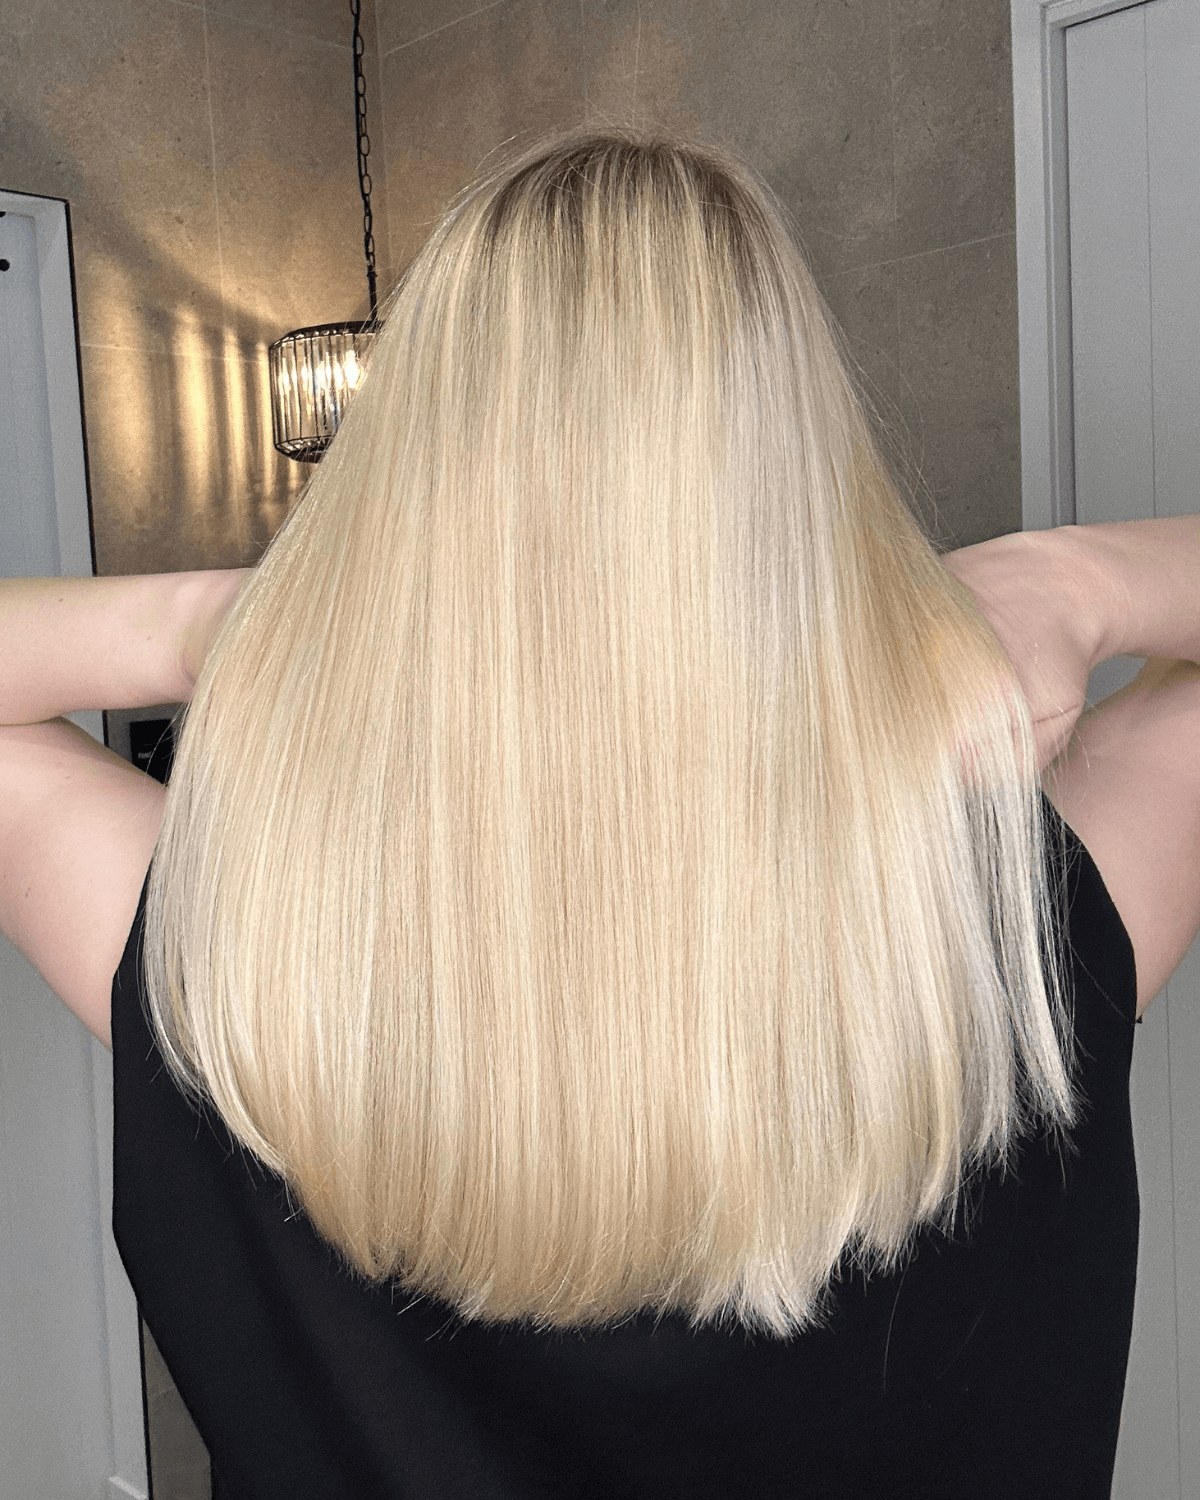 Blonde hair after using Sozo Hair Health products